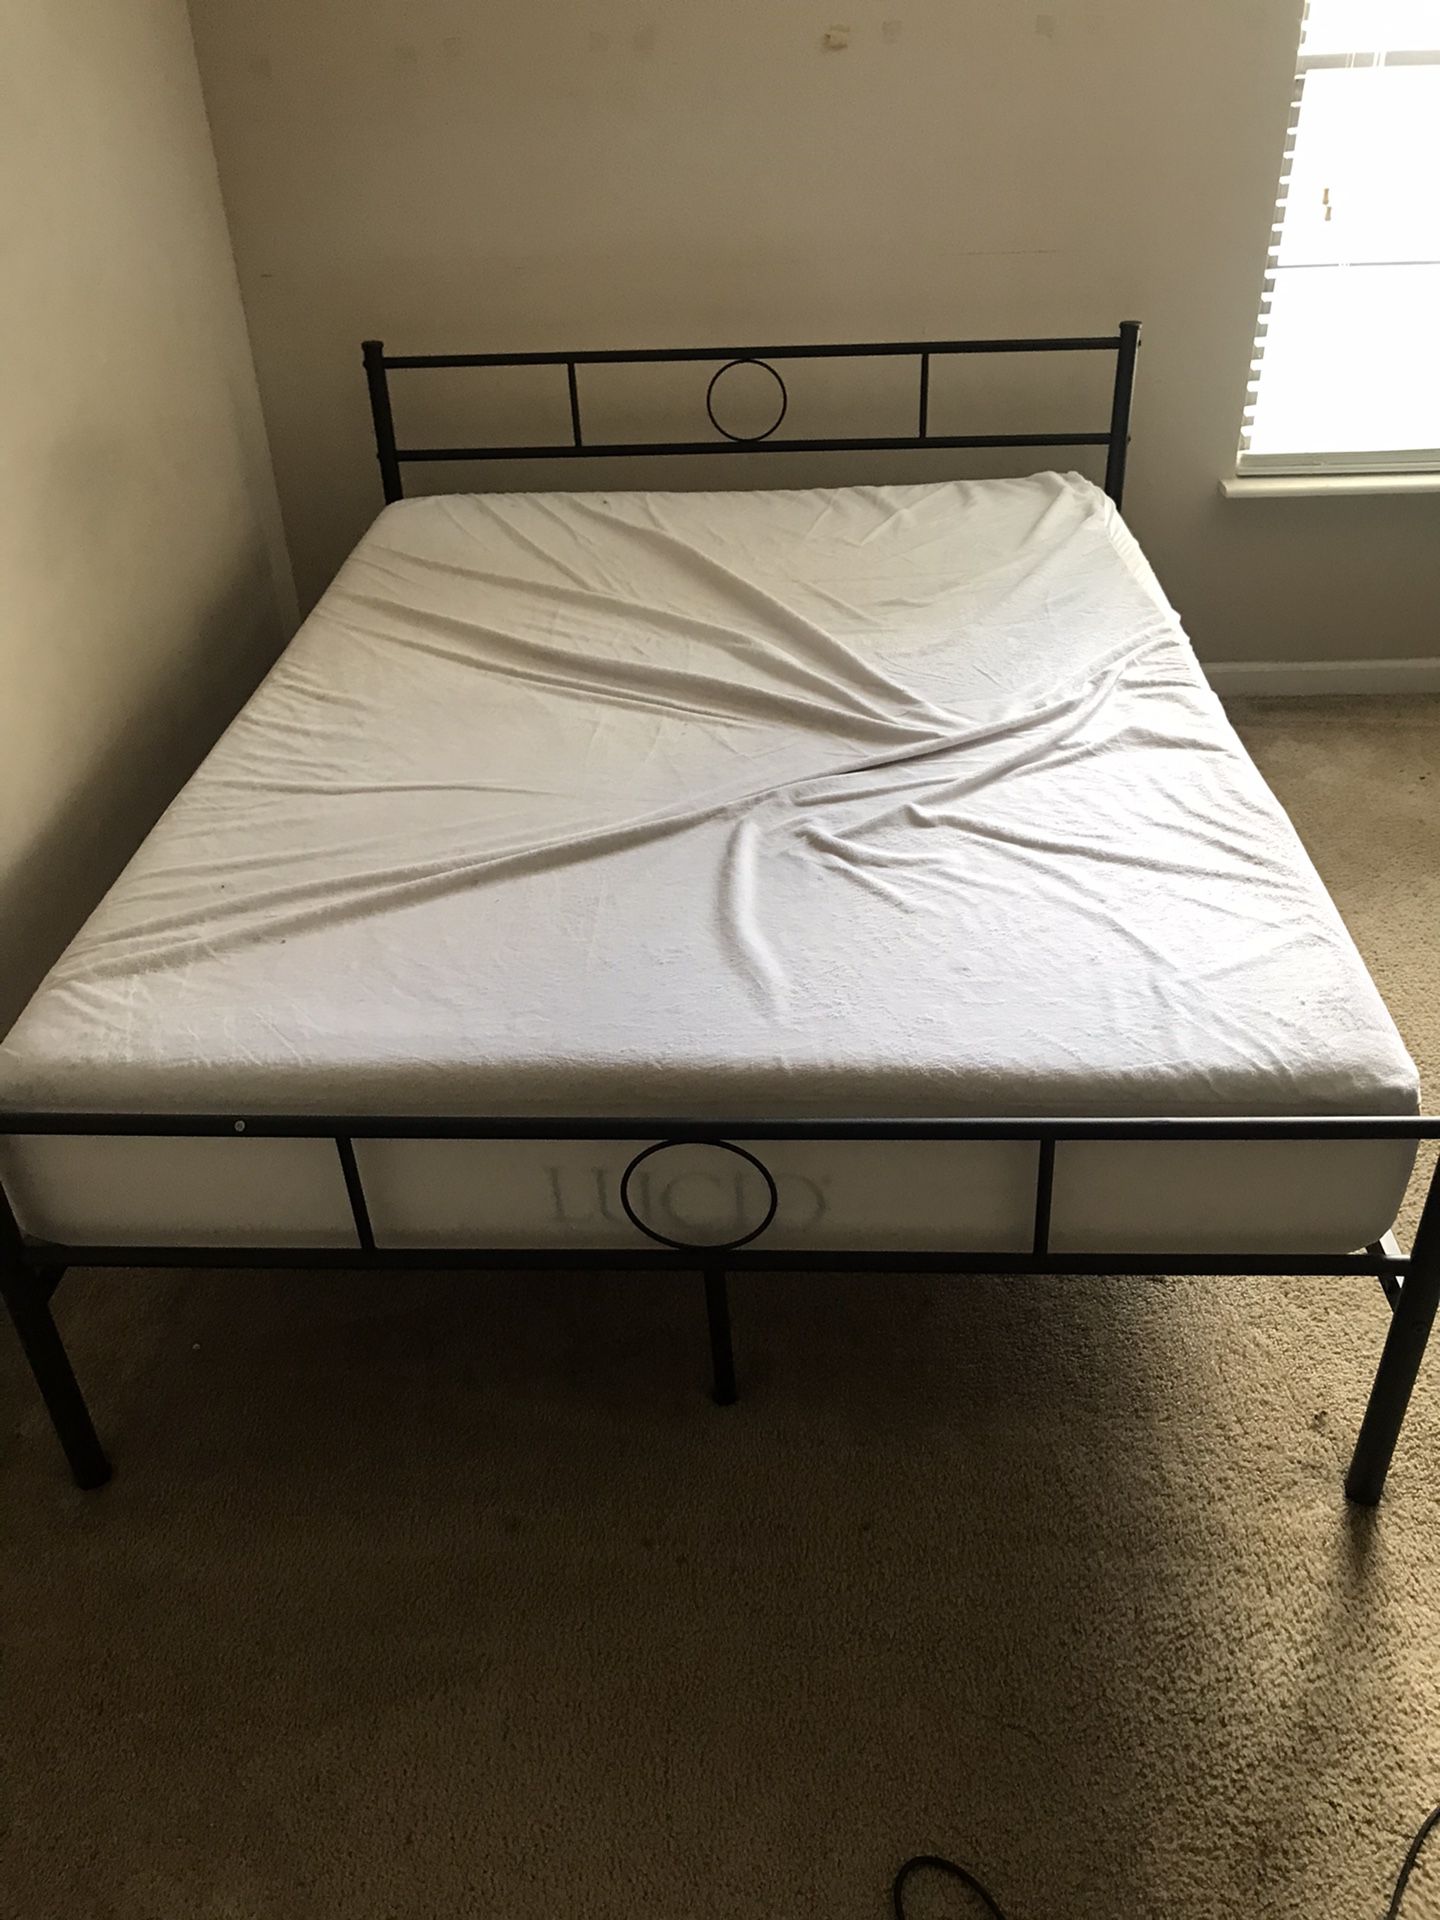 Greenforest bed frame and Lucid Matress; offload by 9/30, 10 am deadline.